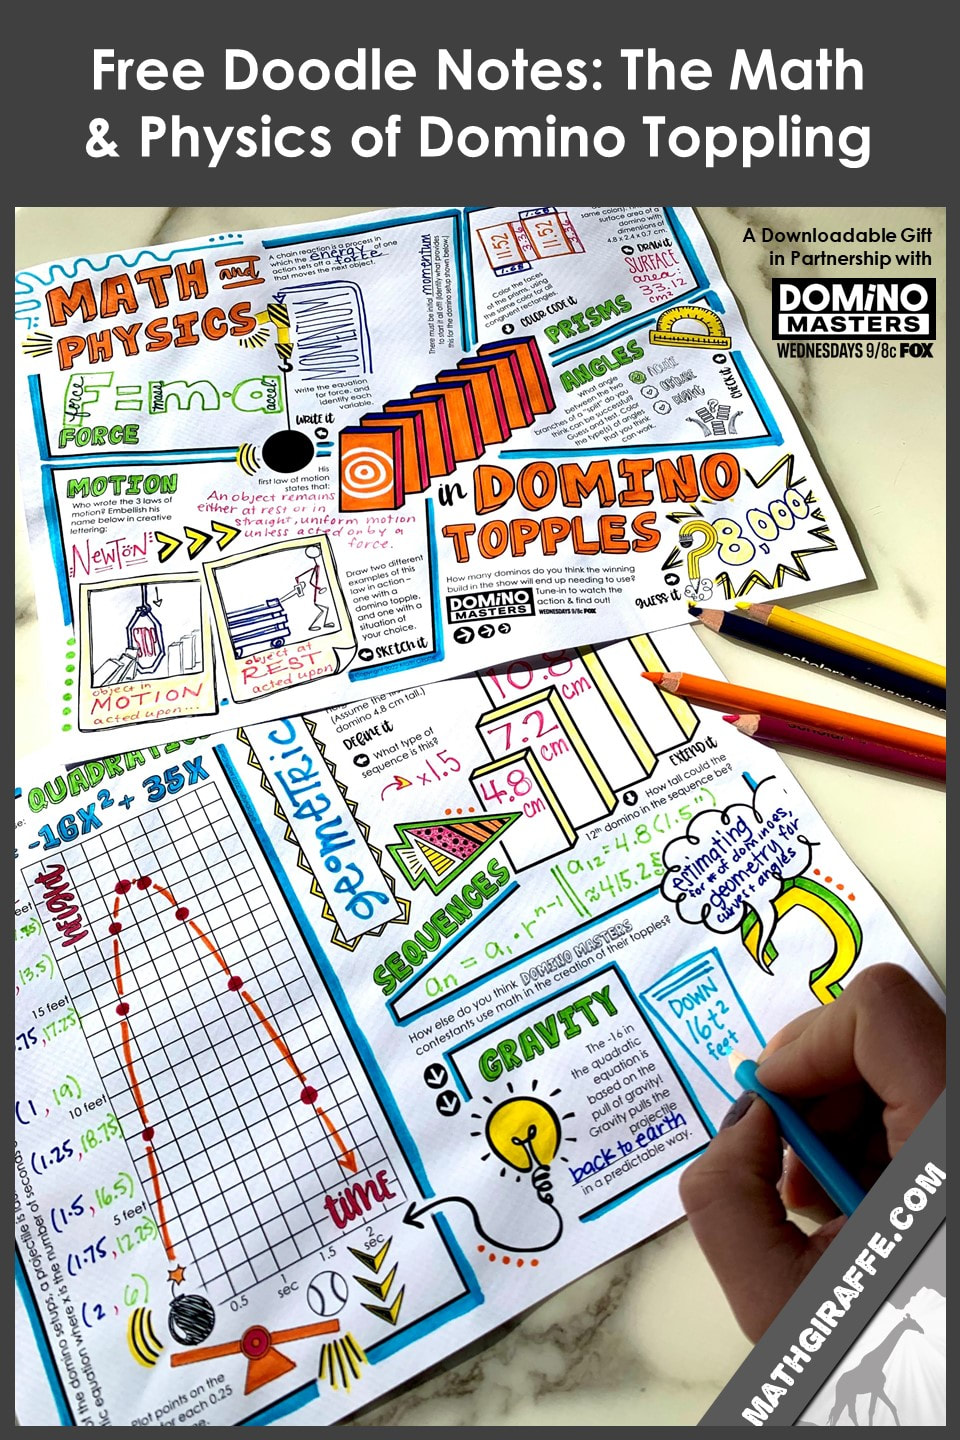 Math Giraffe and Domino Masters partner to offer this STEM - focused free downloadable doodle note lesson on physics & math concepts in domino topples